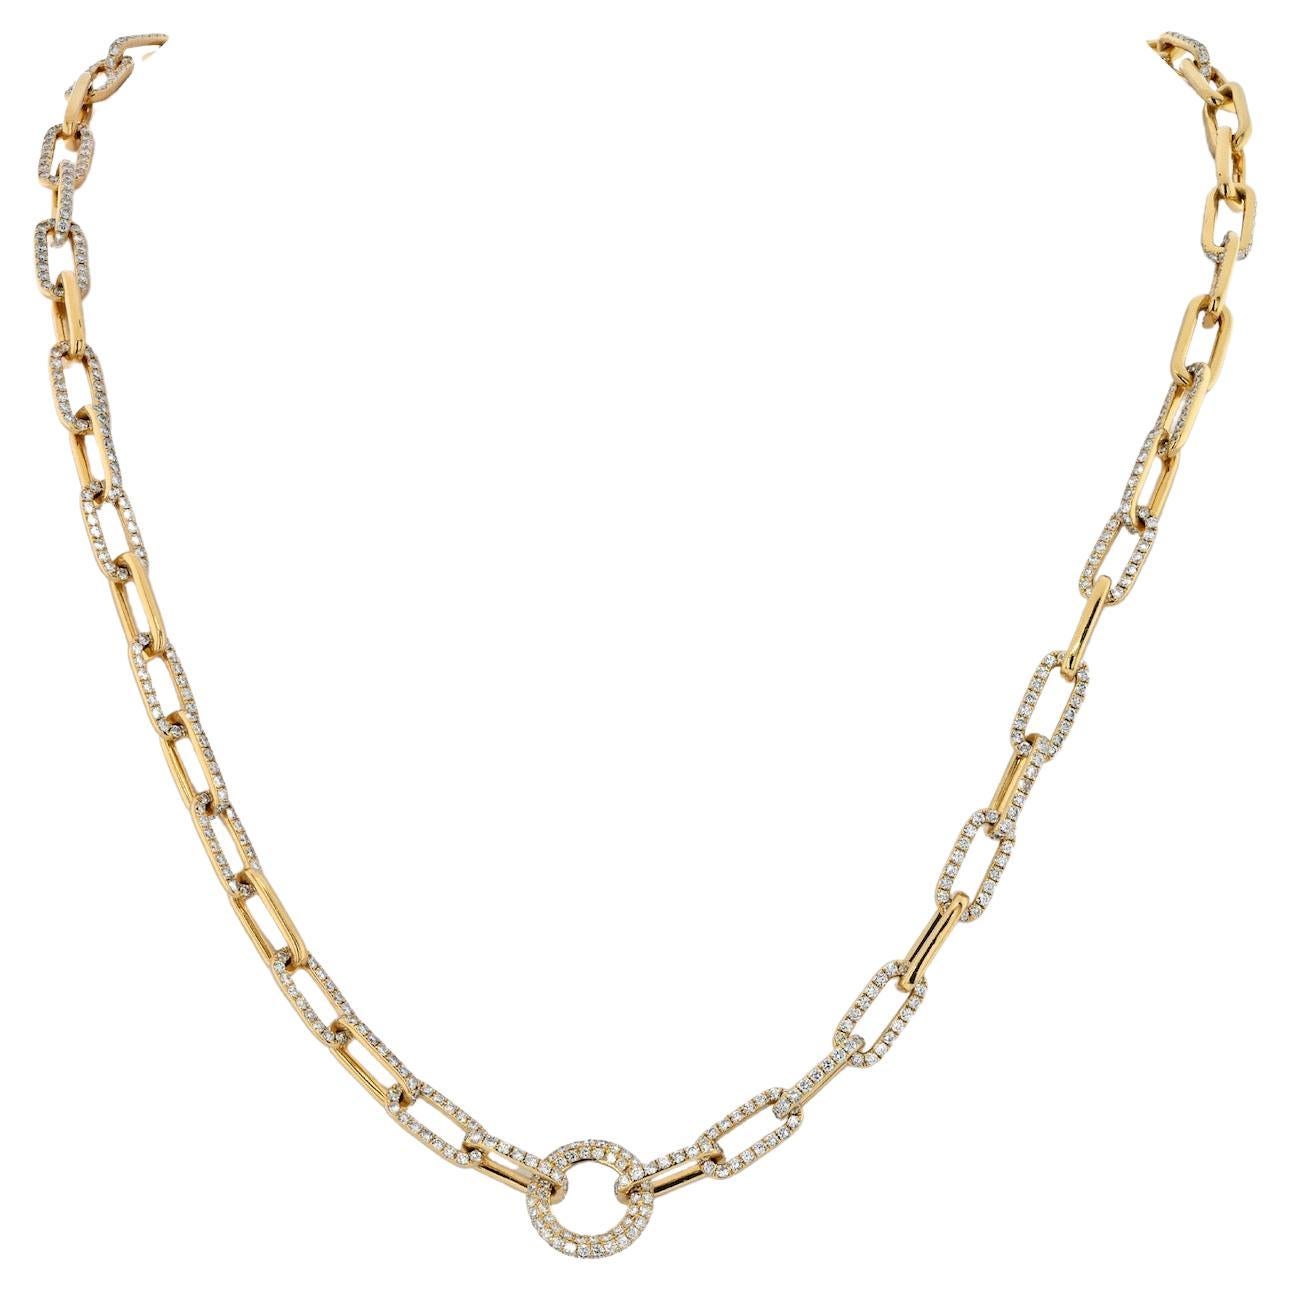 18K Yellow Gold 21 Carats Diamond Link Chain Necklace